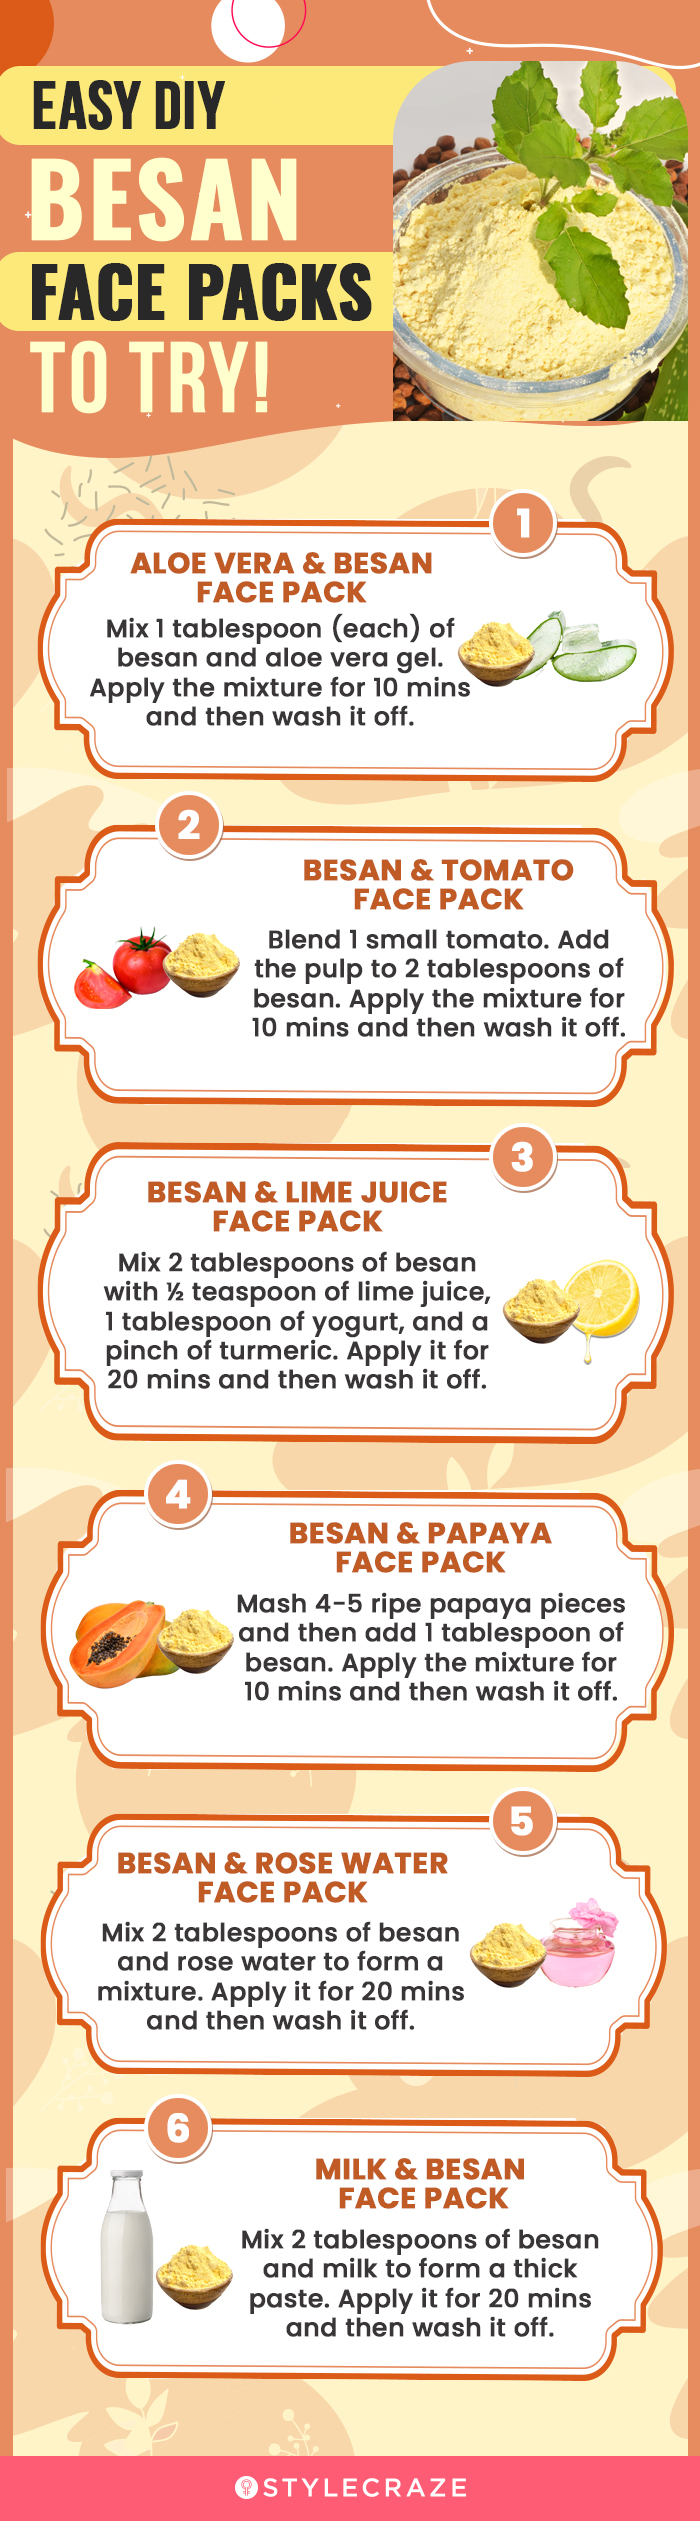 easy diy besan face packs to try! (infographic)